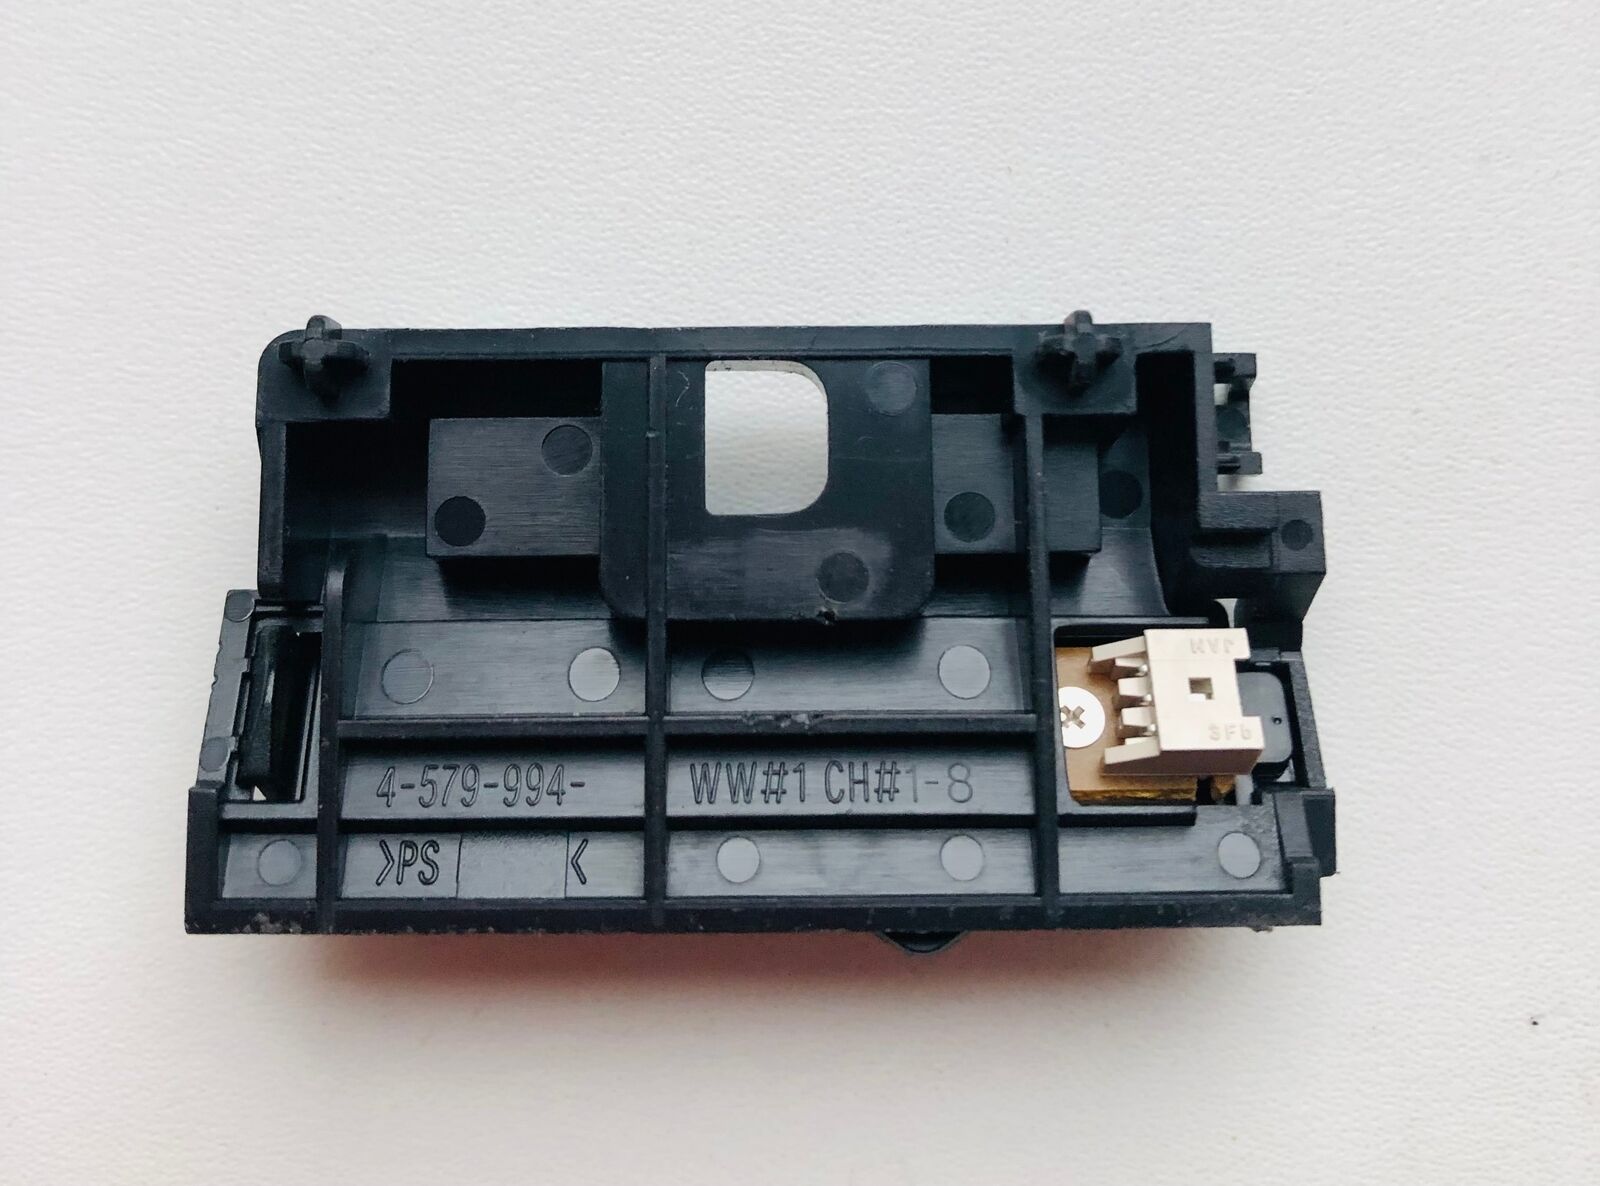 4-579-994 BUTTONS SONY KD-75XE8596